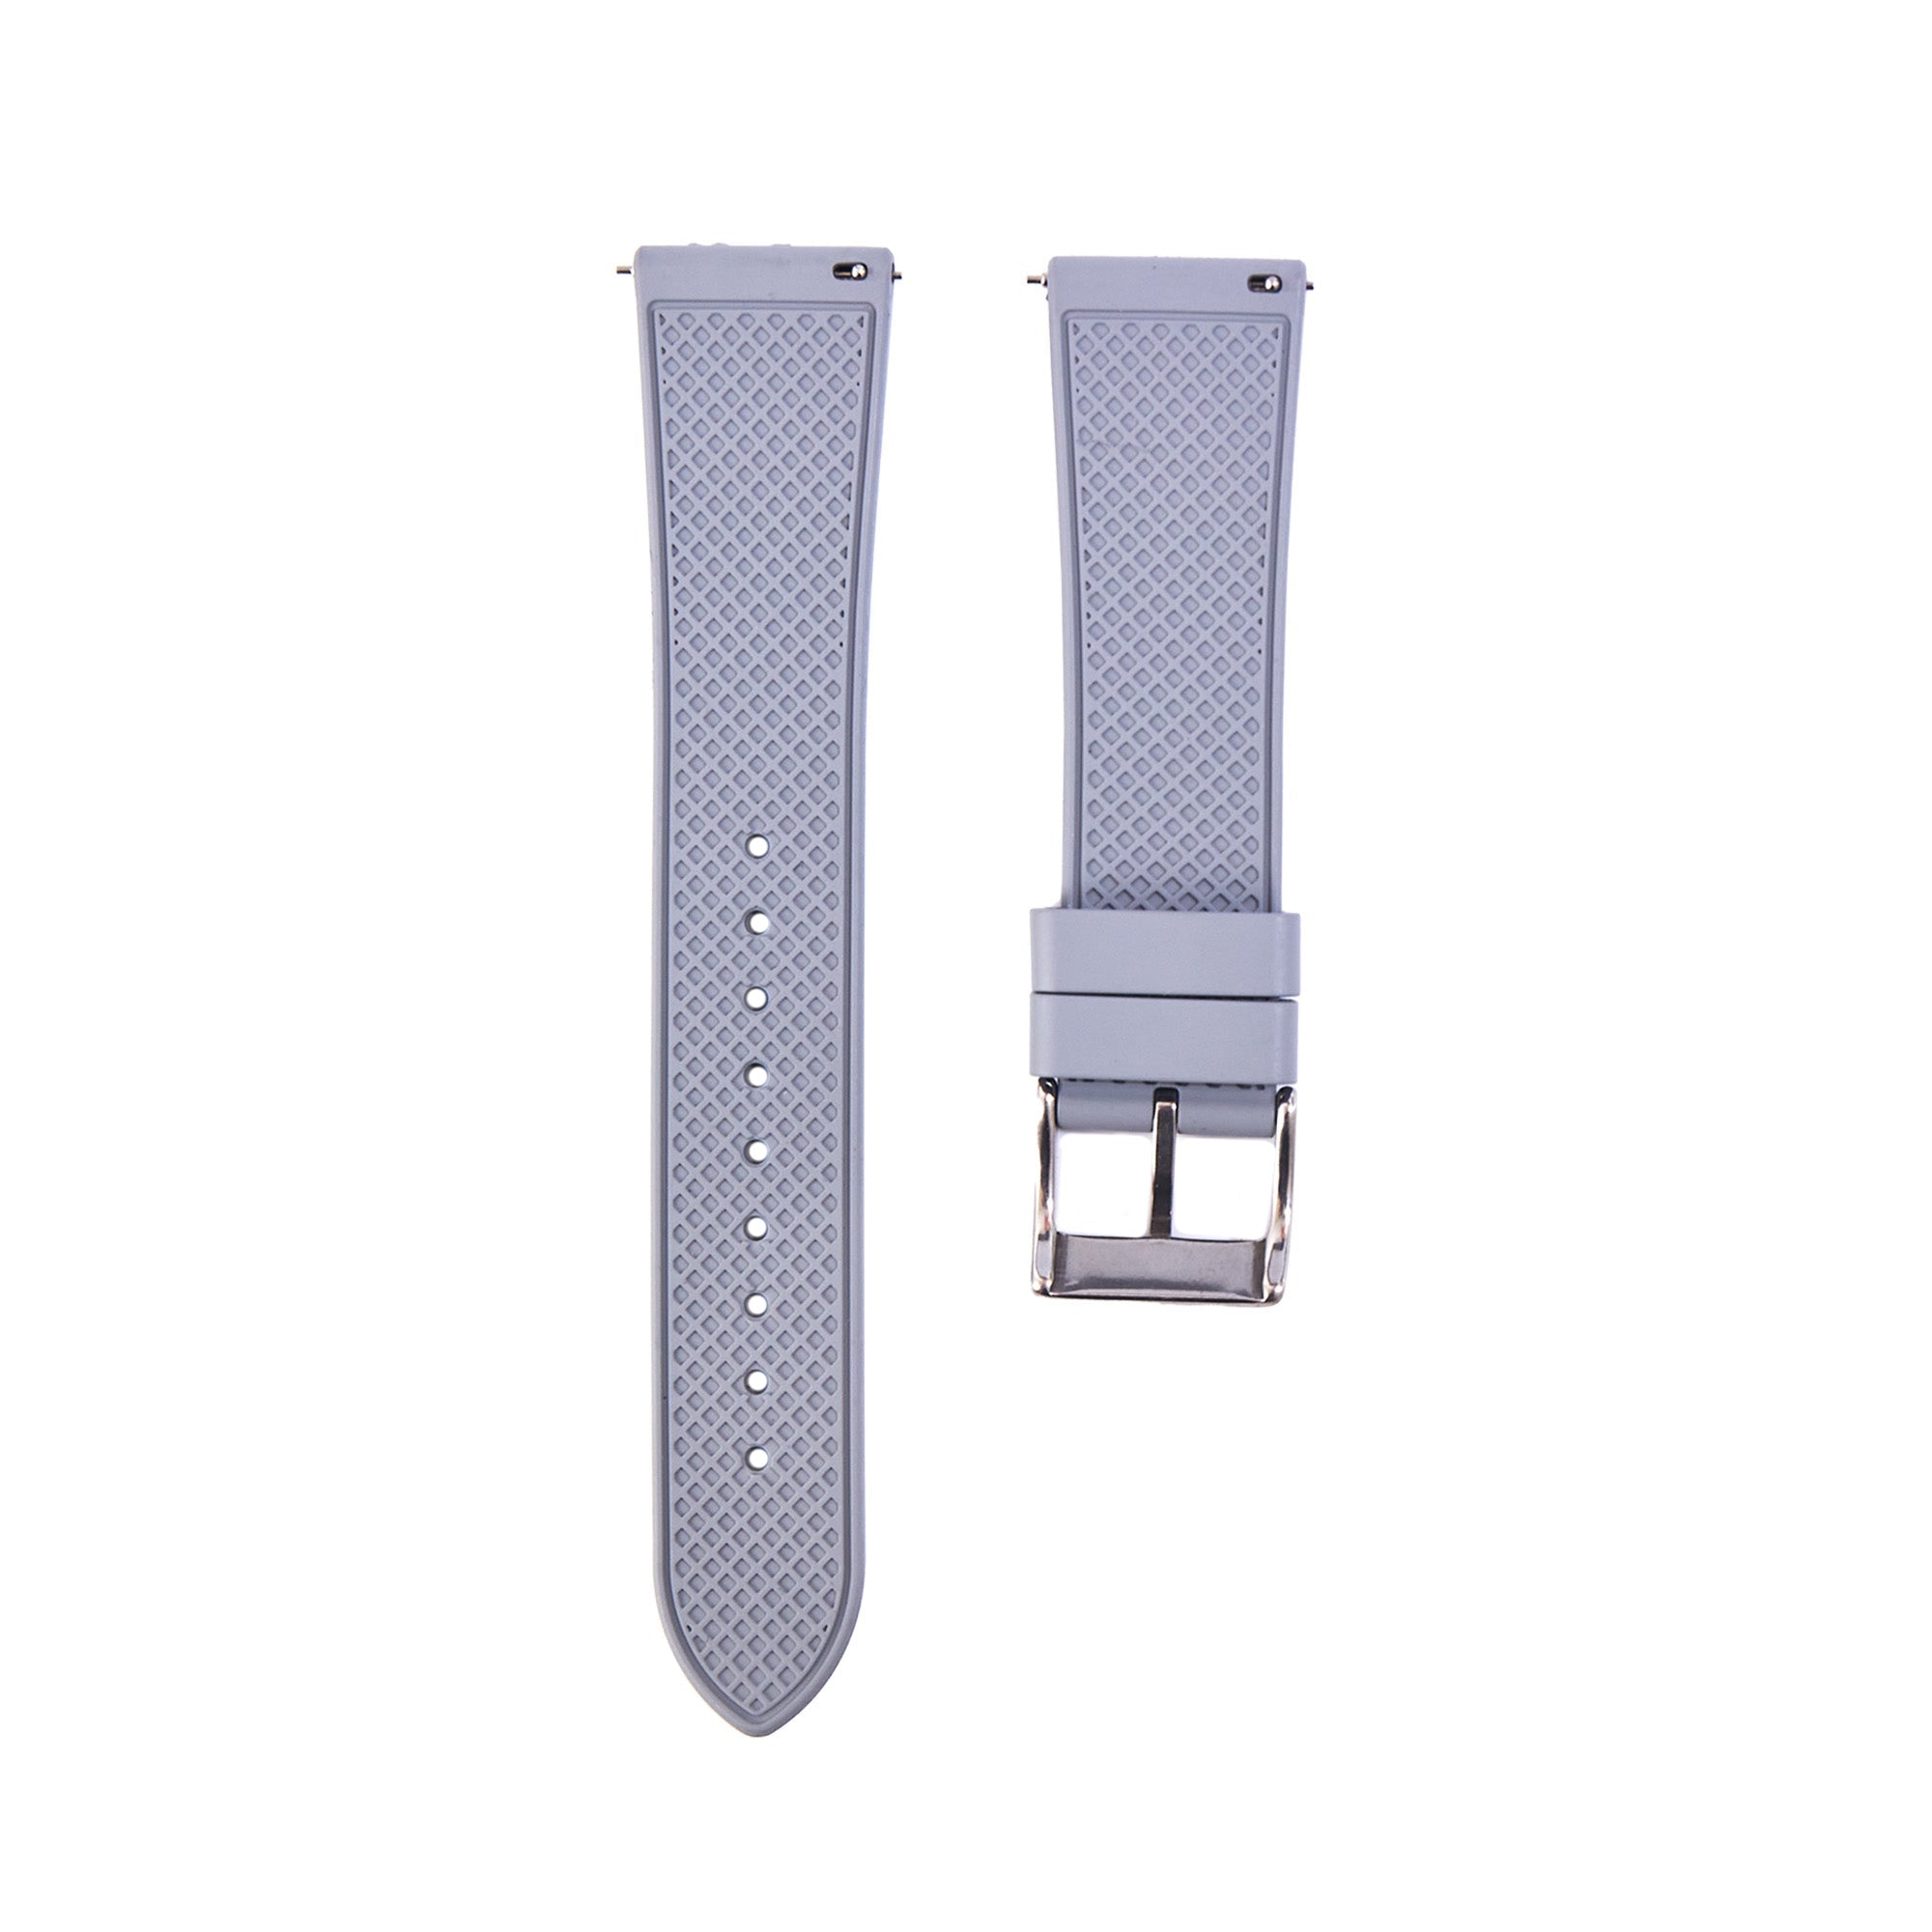 Grid FKM Rubber Strap - Quick-Release – Compatible with Blancpain x Swatch - Grey (2412) -StrapSeeker